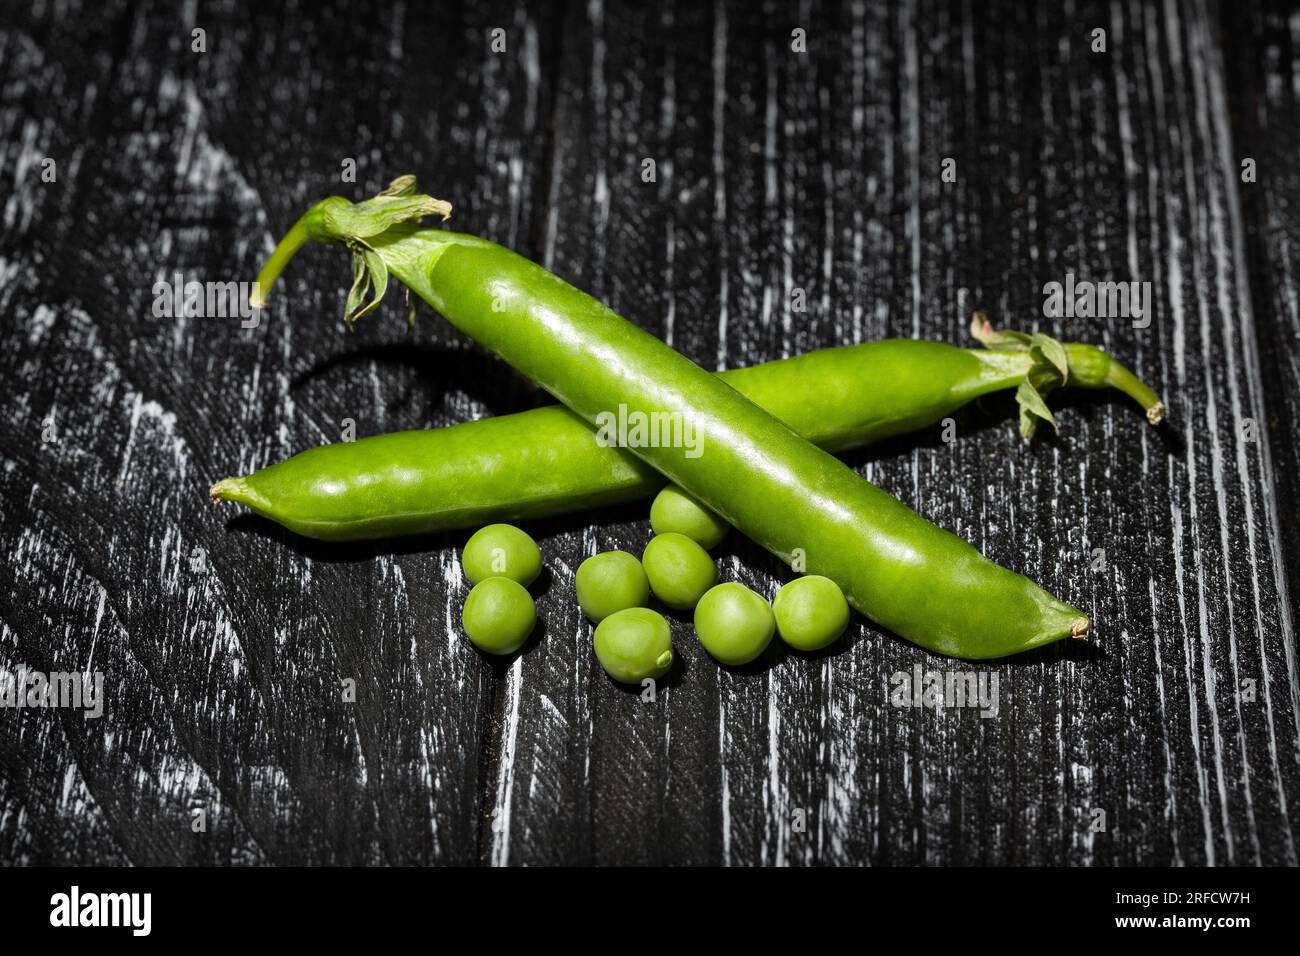 green pea on wood background Stock Photo